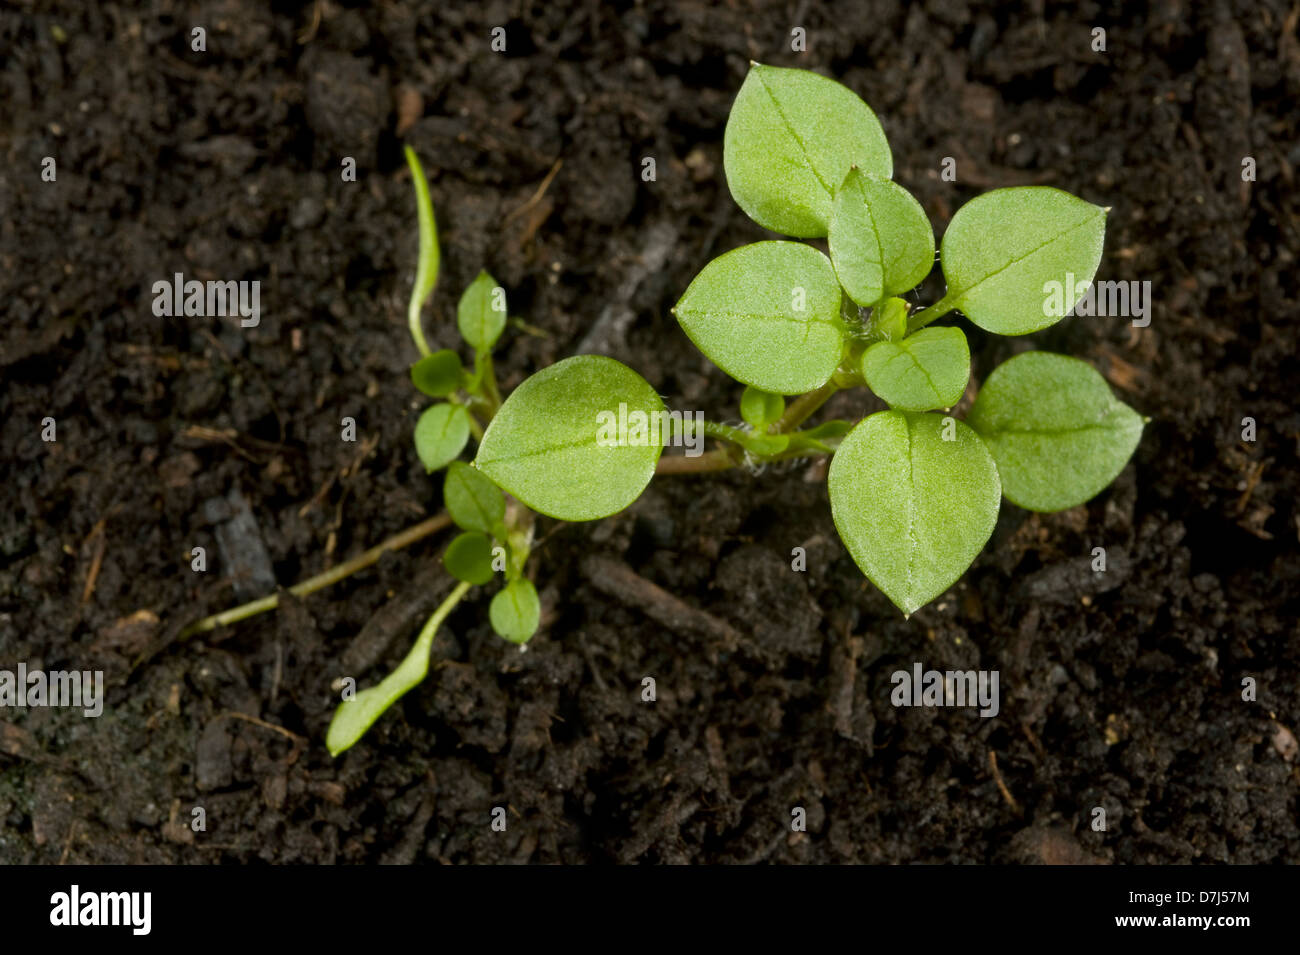 Seedling developing into a young plant of chickweed, Stellaria media, an annual agricultural and garden weed Stock Photo